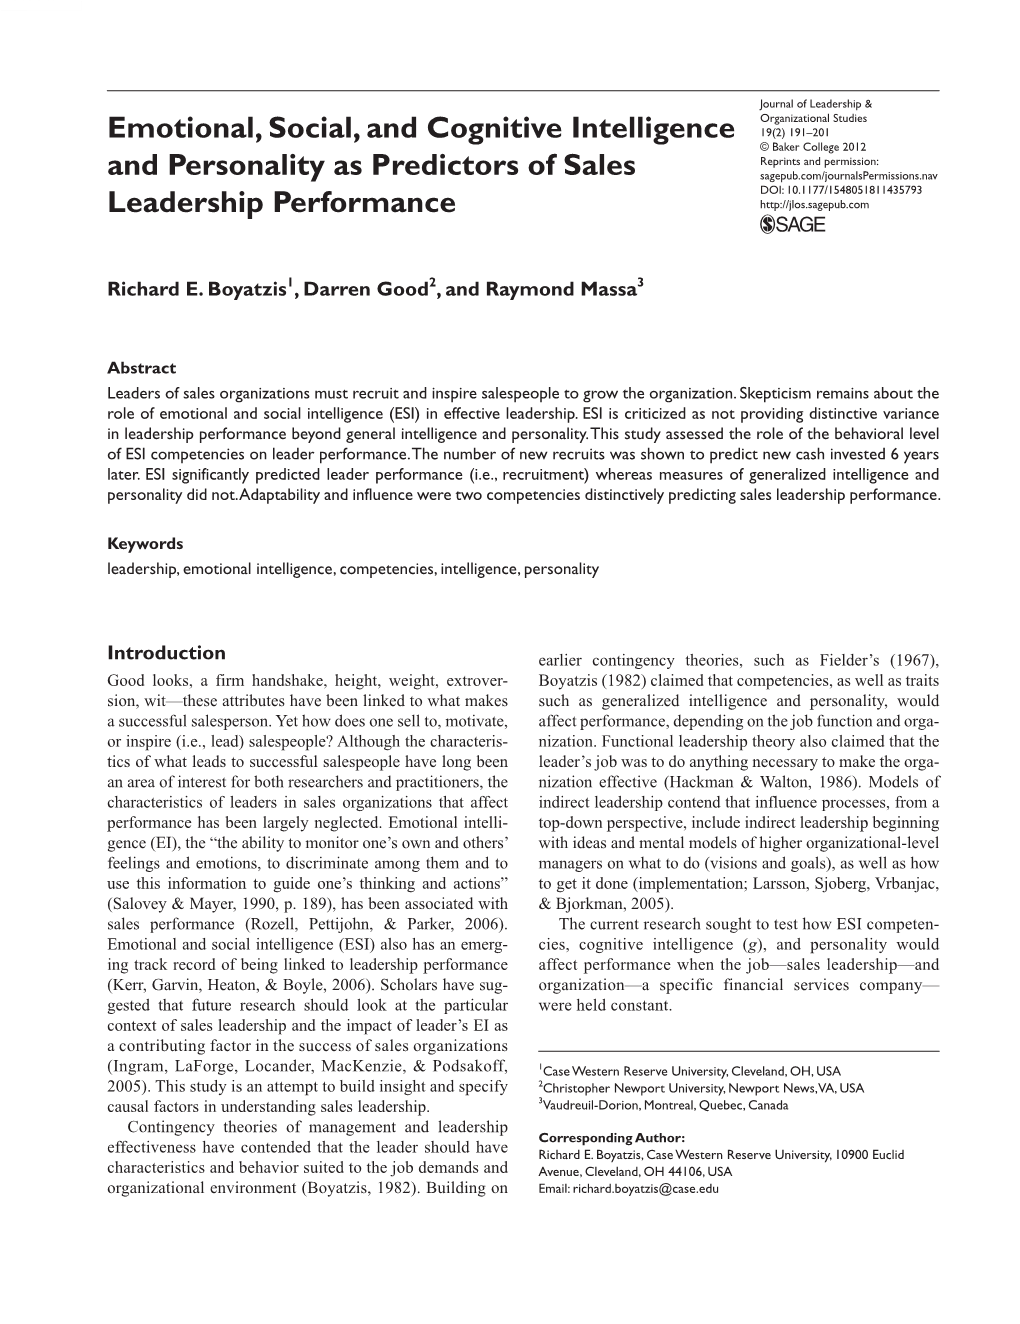 Emotional, Social, and Cognitive Intelligence and Personality As Predictors of Sales Leadership Performance